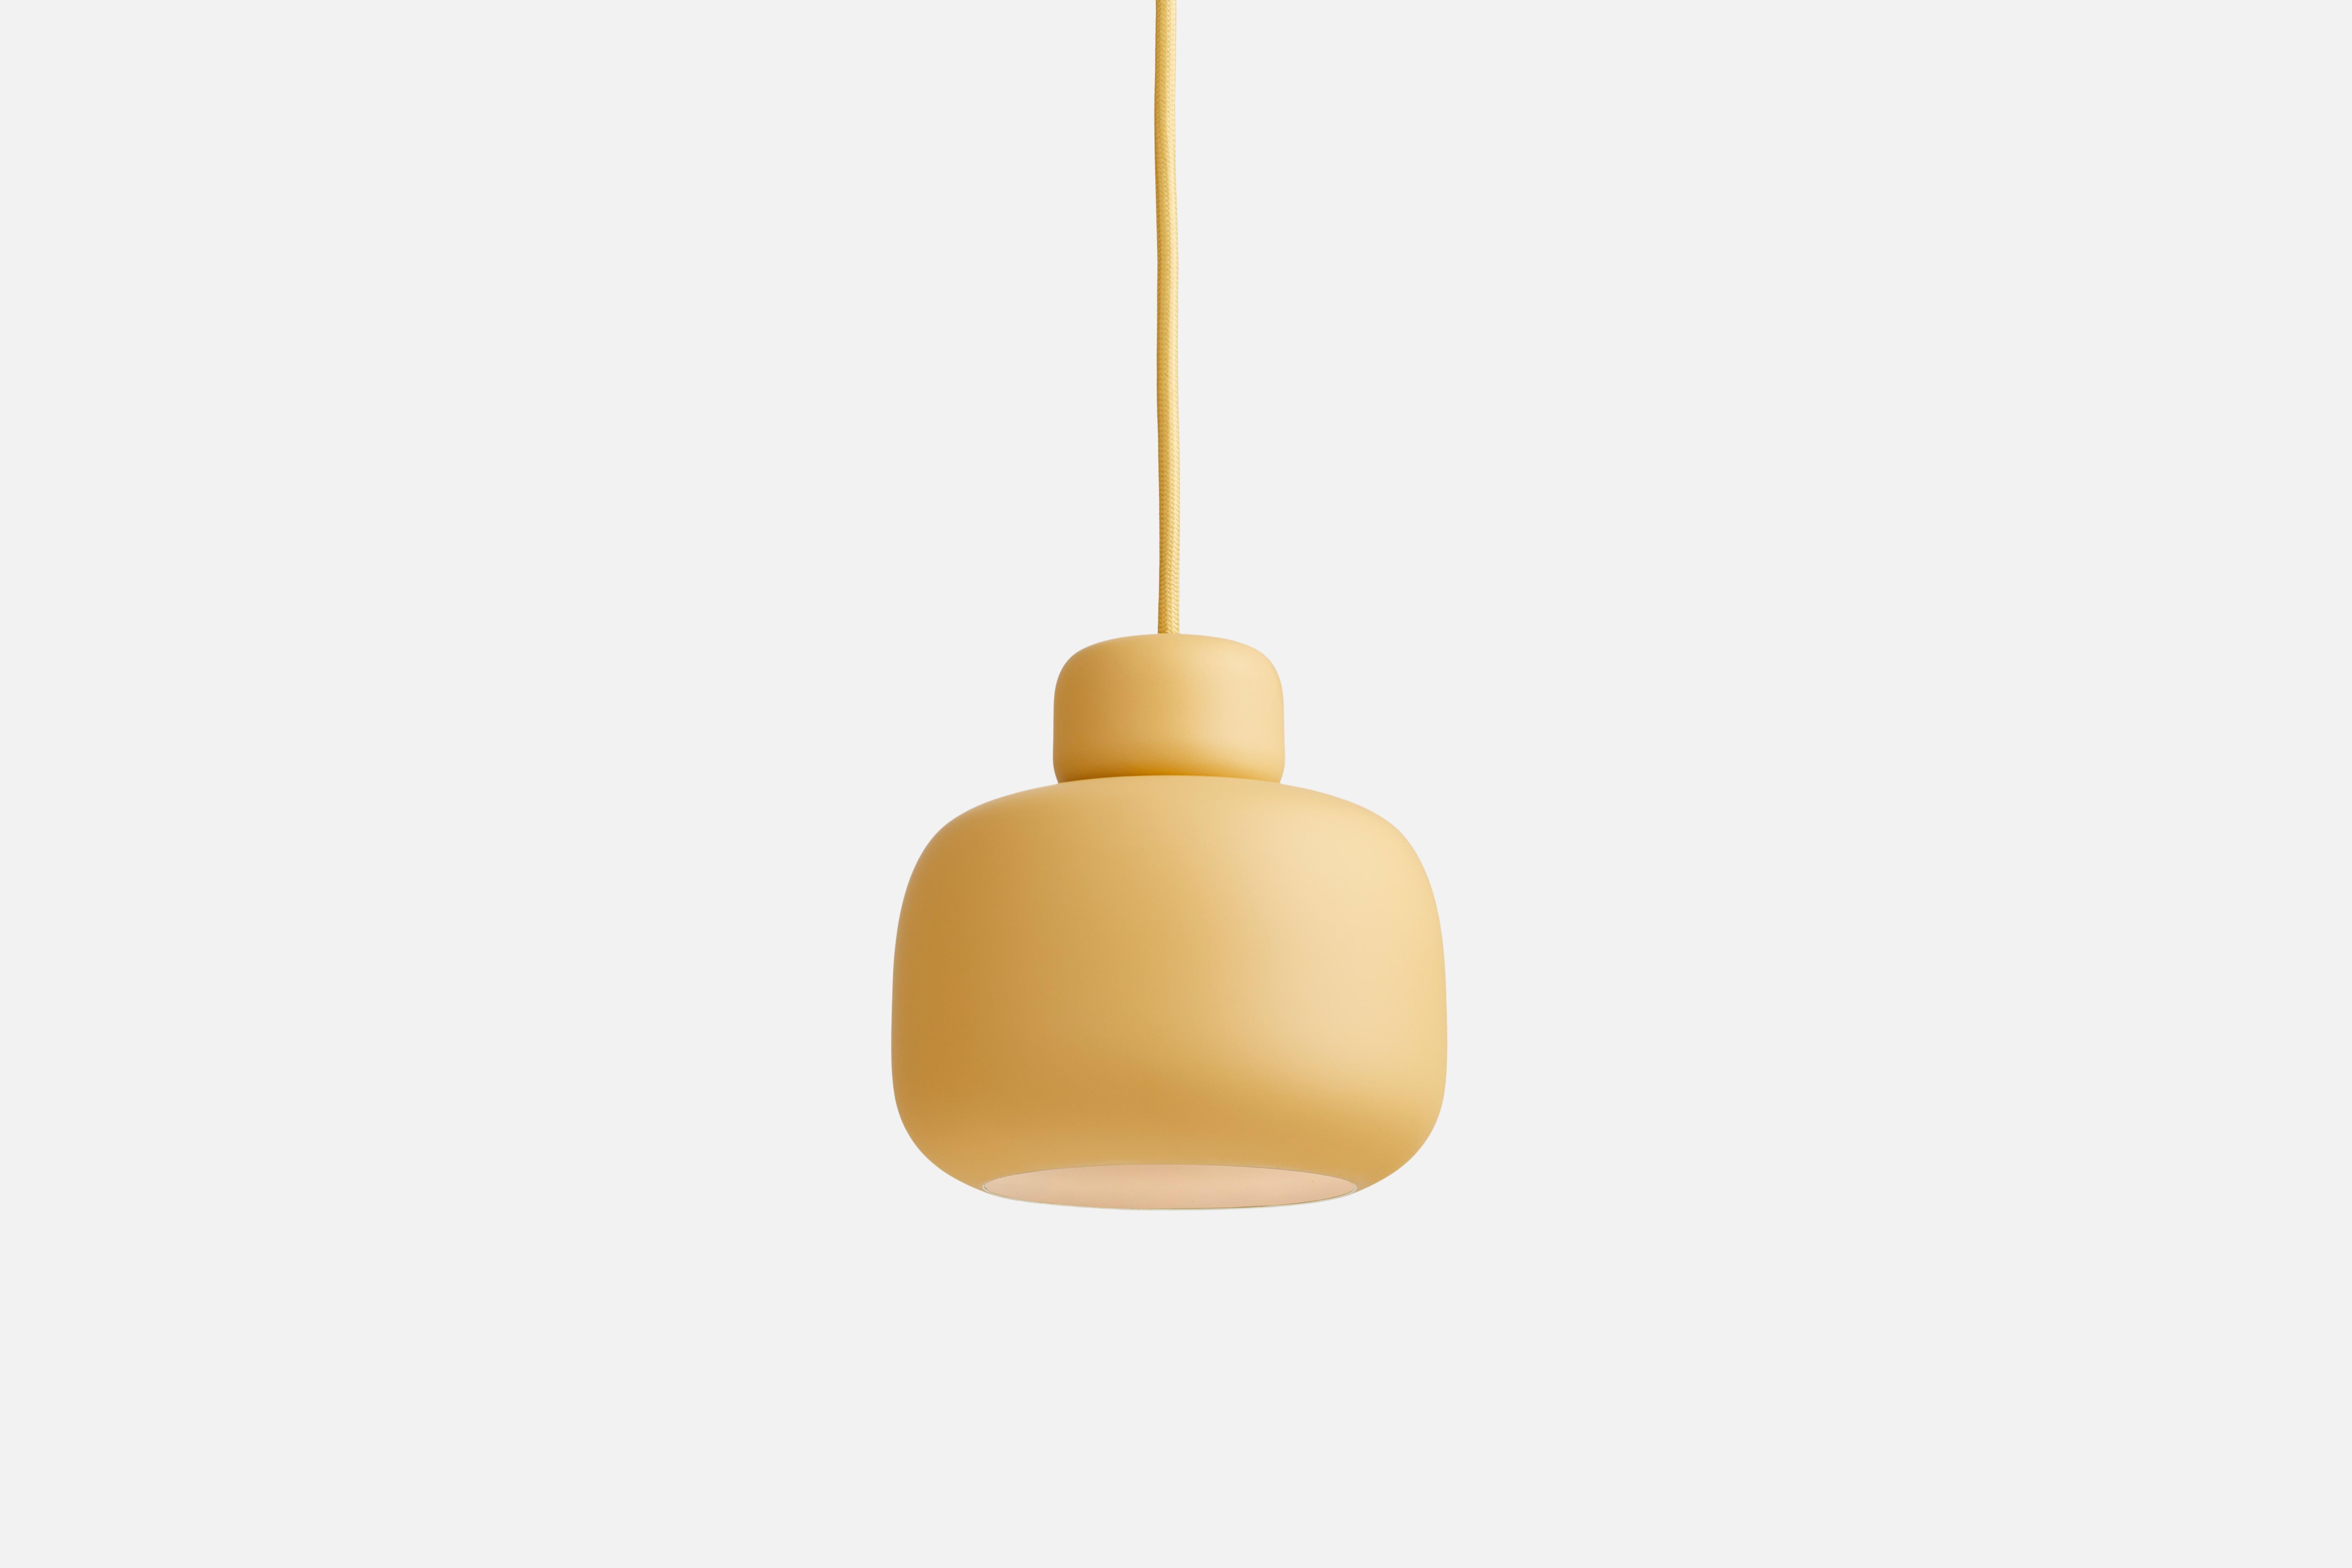 Yellow Stone pendant lamp by Philip Bro
Materials: Metal.
Dimensions: D 15.9 x H 16 cm
Available in yellow, white and black.

Philip Bro is an experienced Danish designer with a drive to prove that serious design can still be stylish, playful